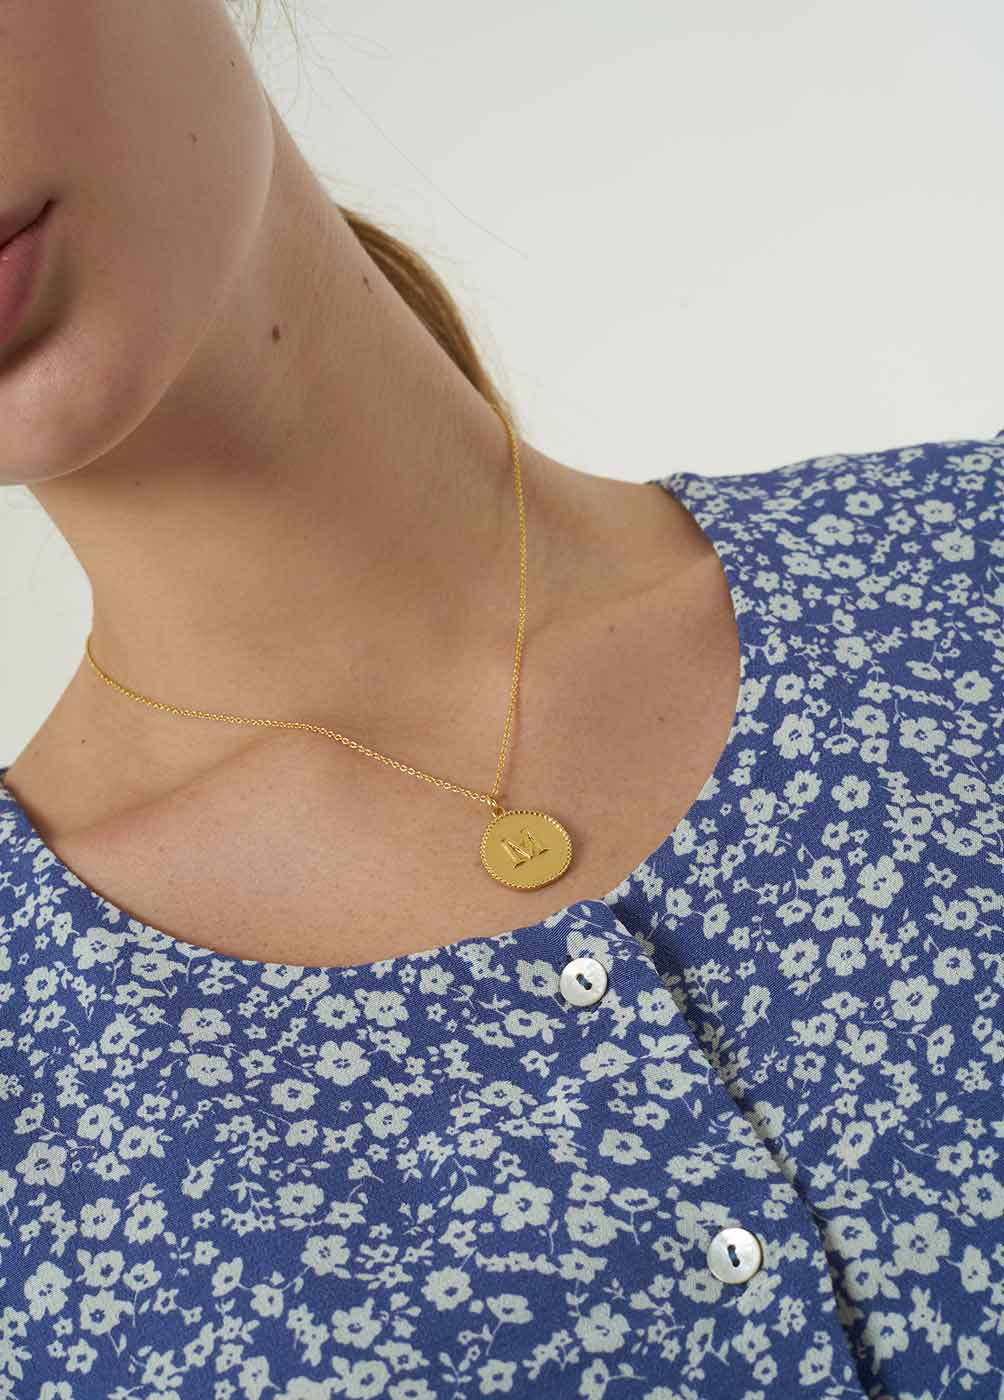 'M' INITIAL MEDALLION NECKLACE